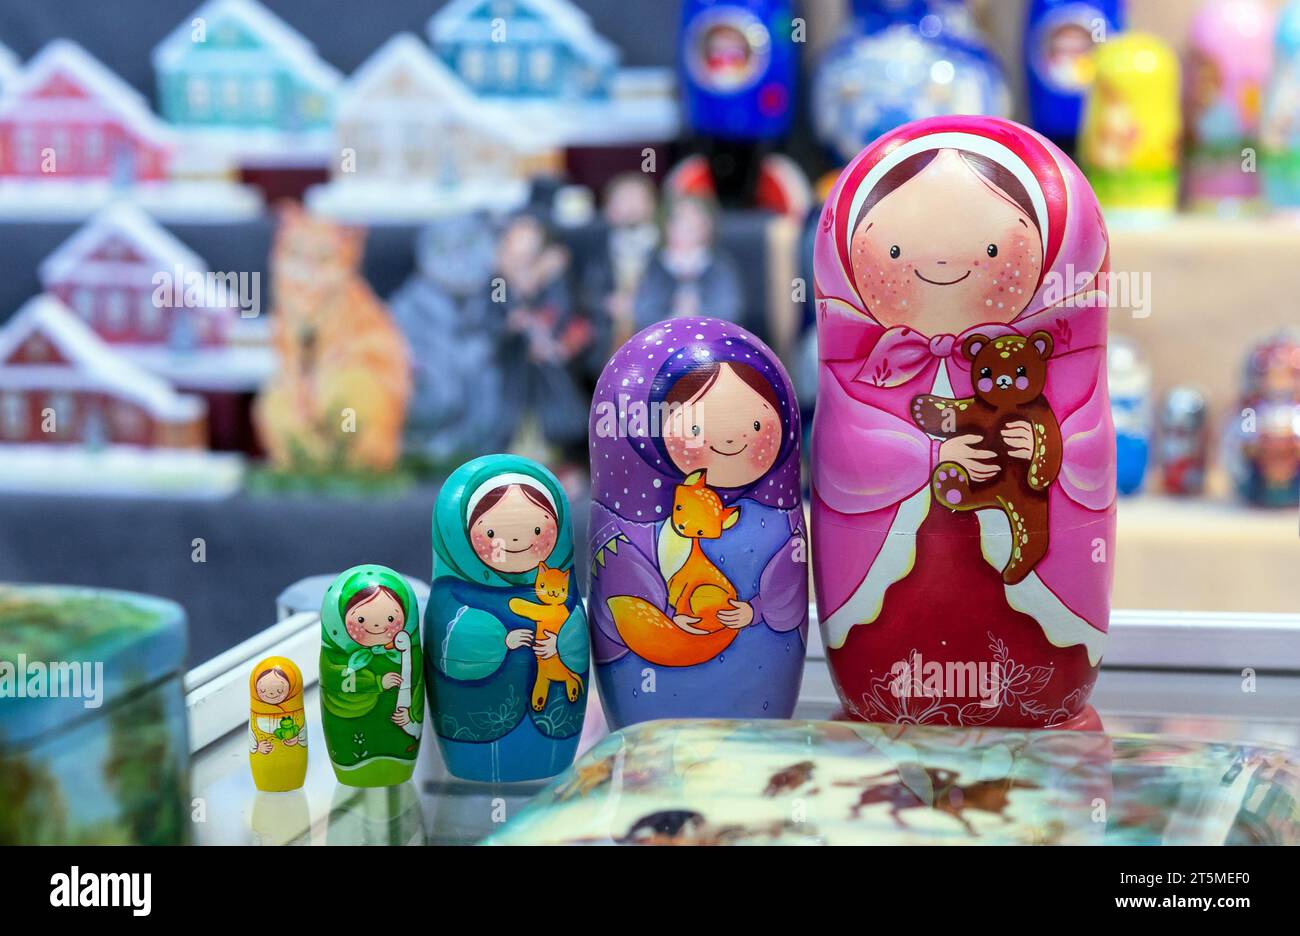 Russian nesting doll or matryoshka in the window of the gift shop. Stock Photo